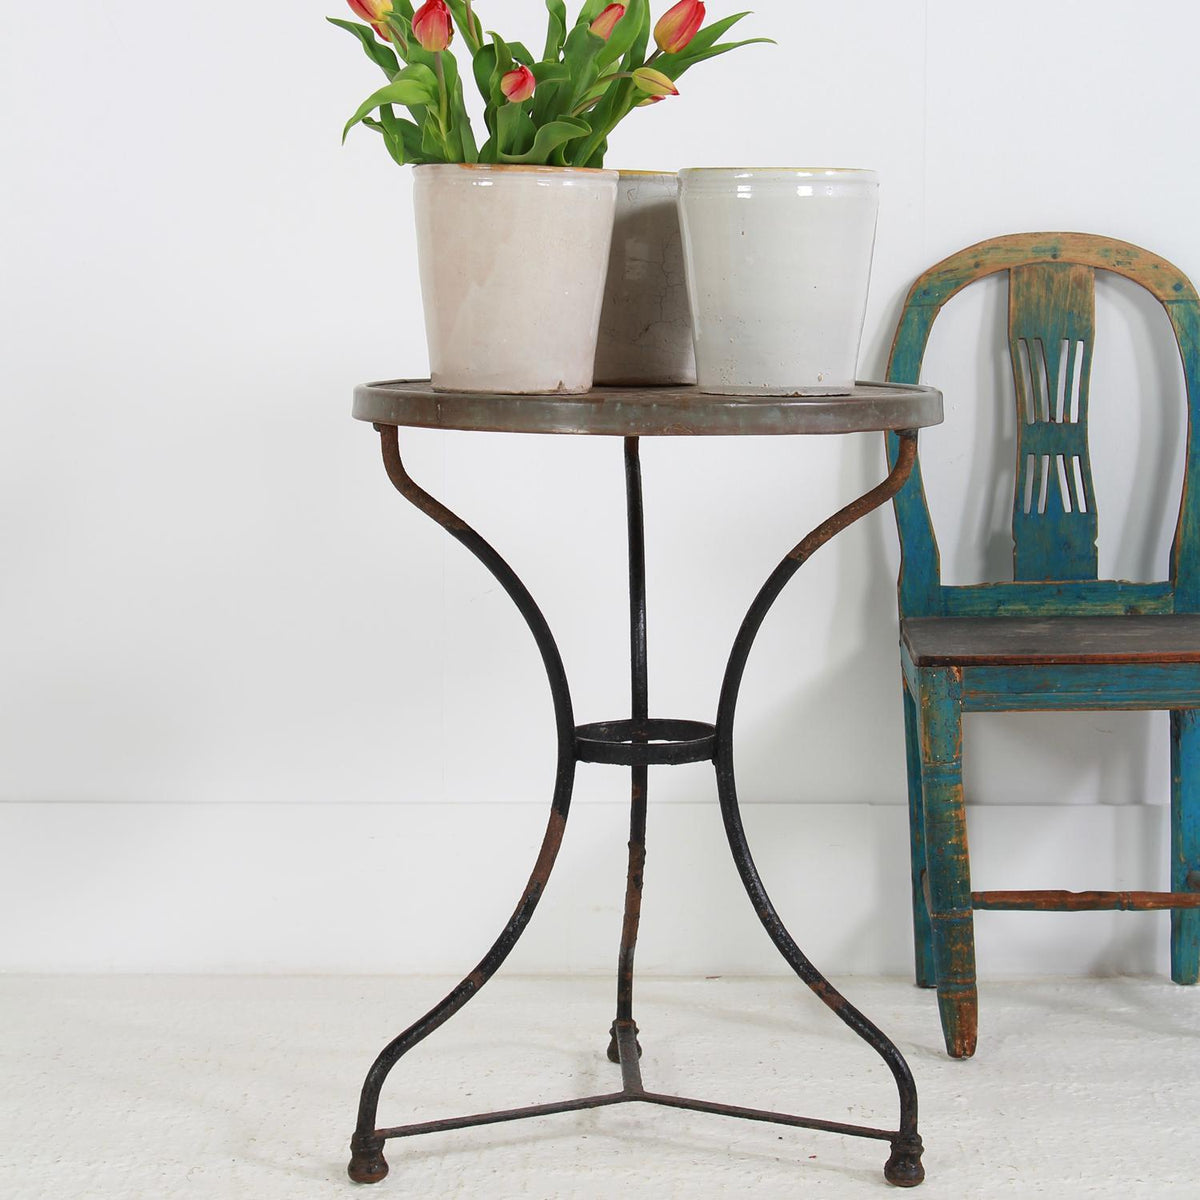 French Round Wrought Iron and Marble Garden Table